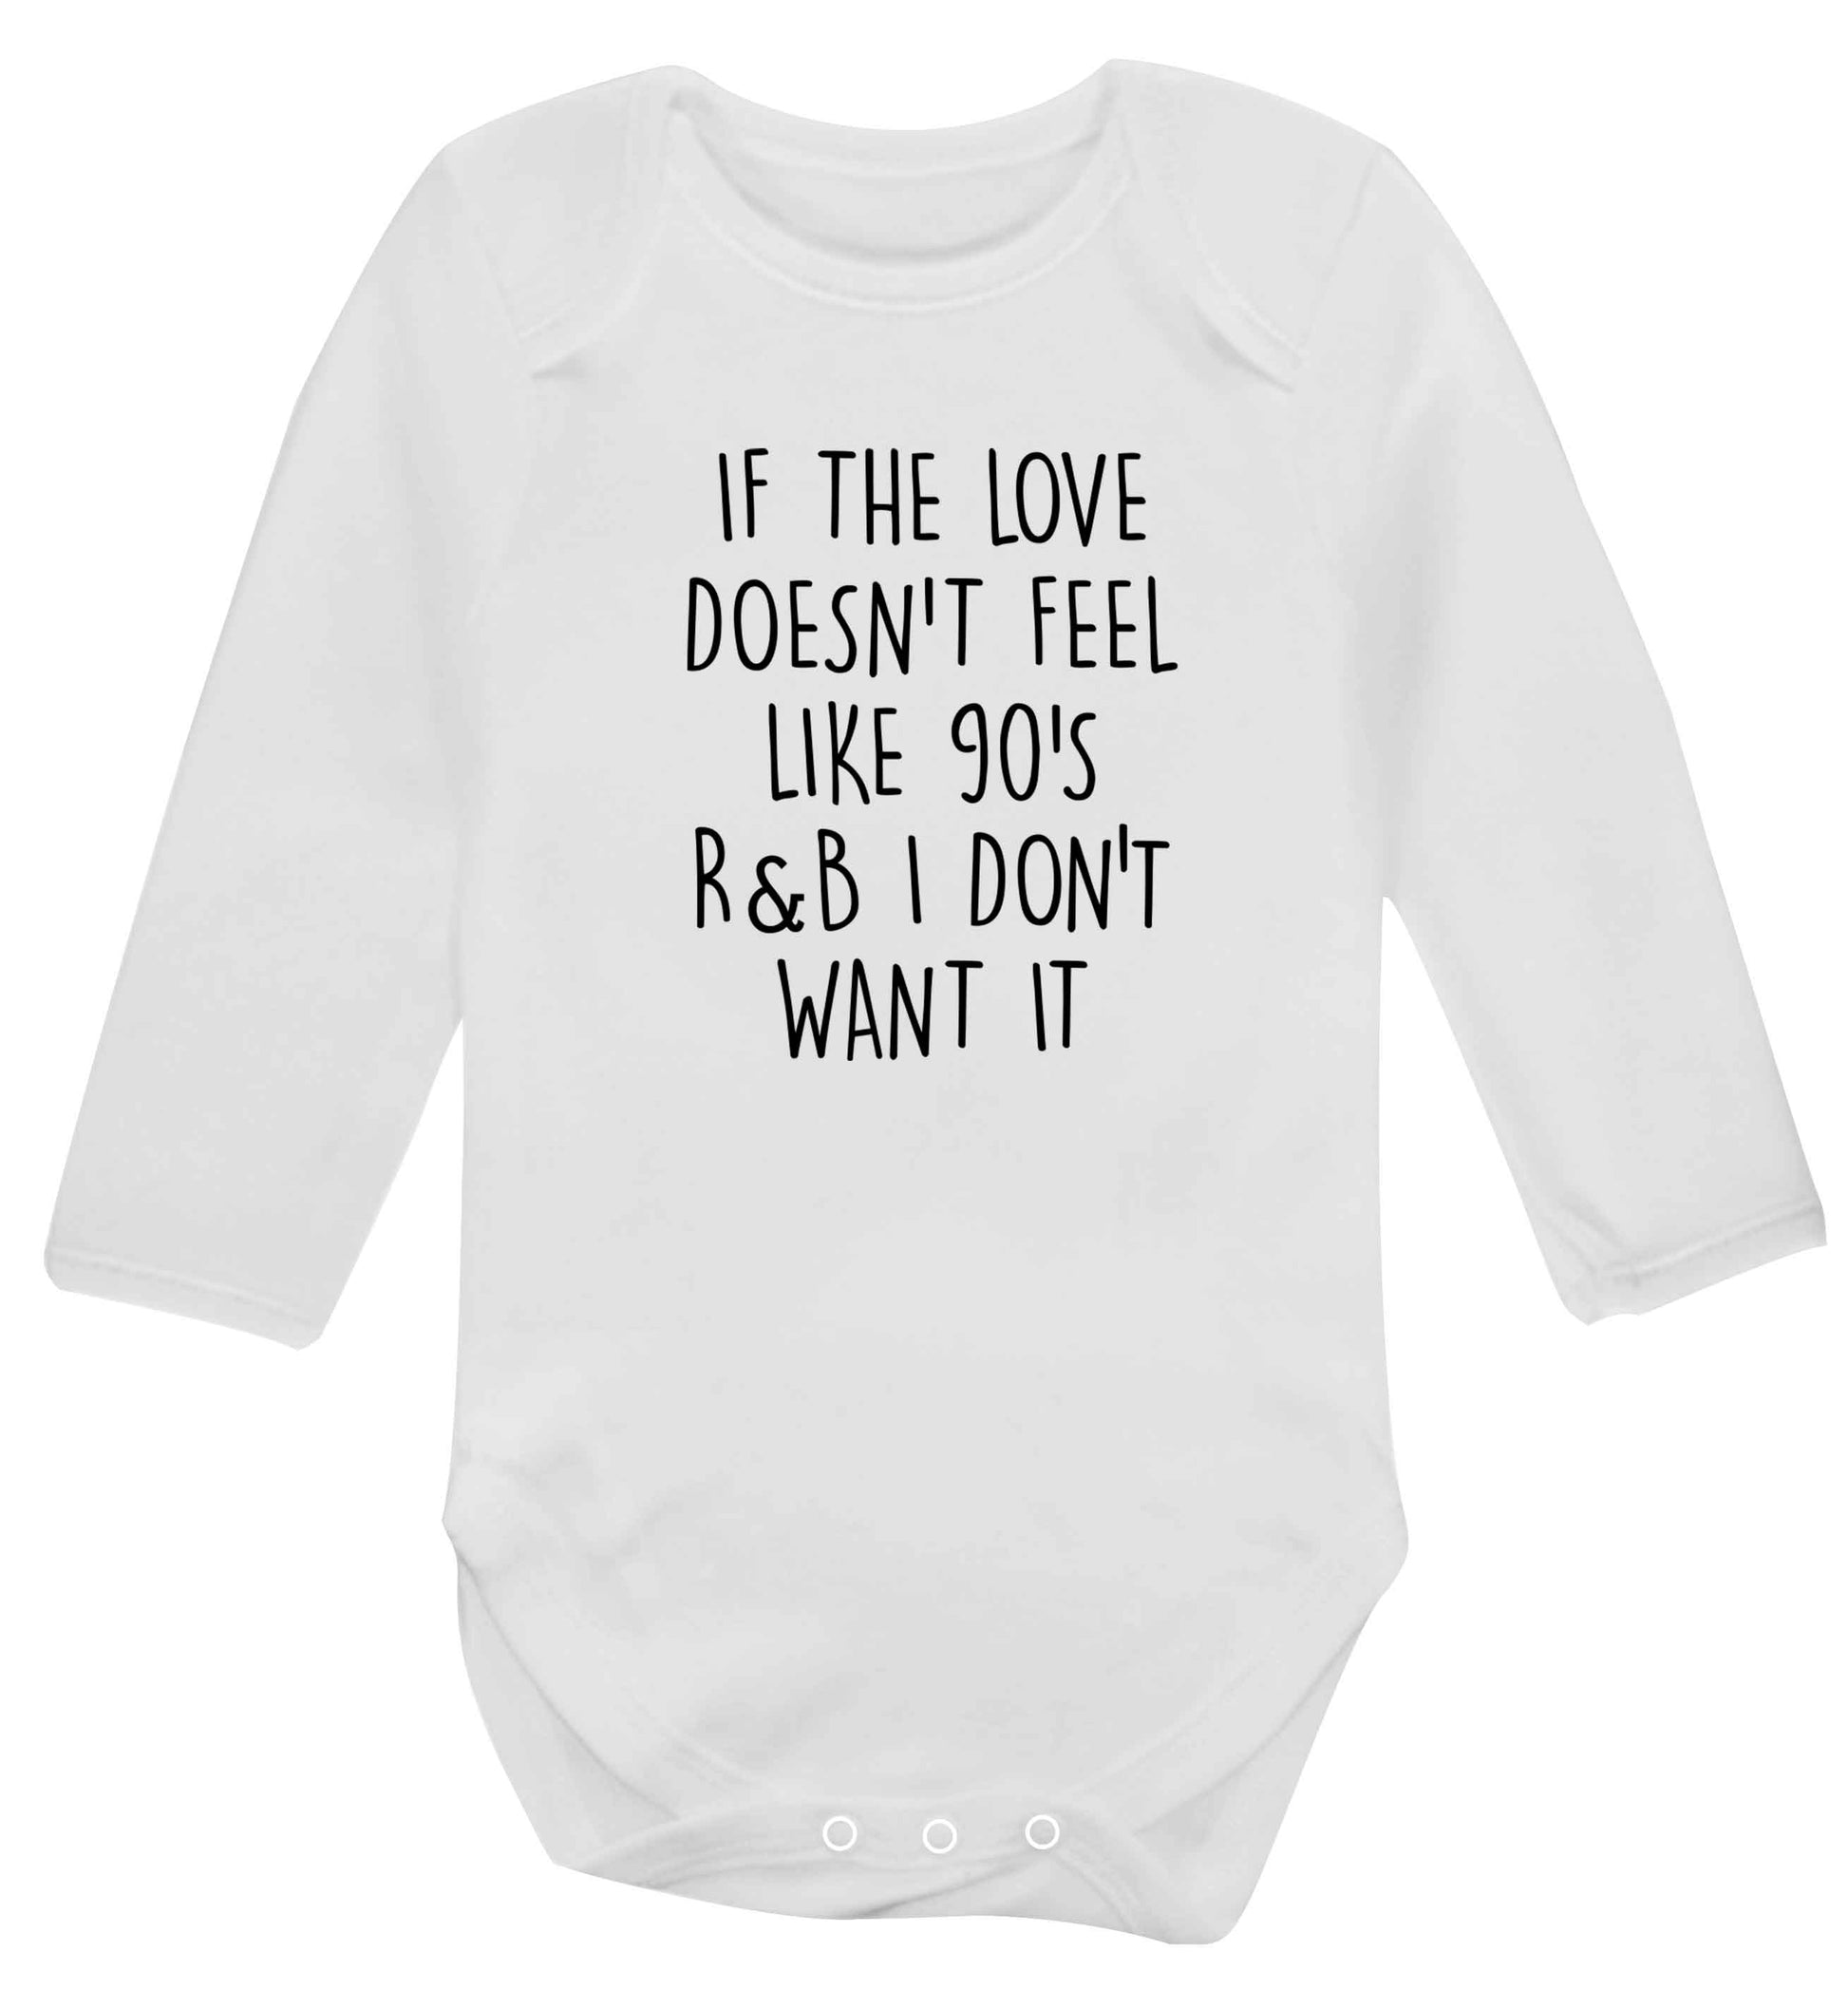 If the love doesn't feel like 90's r&b I don't want it baby vest long sleeved white 6-12 months